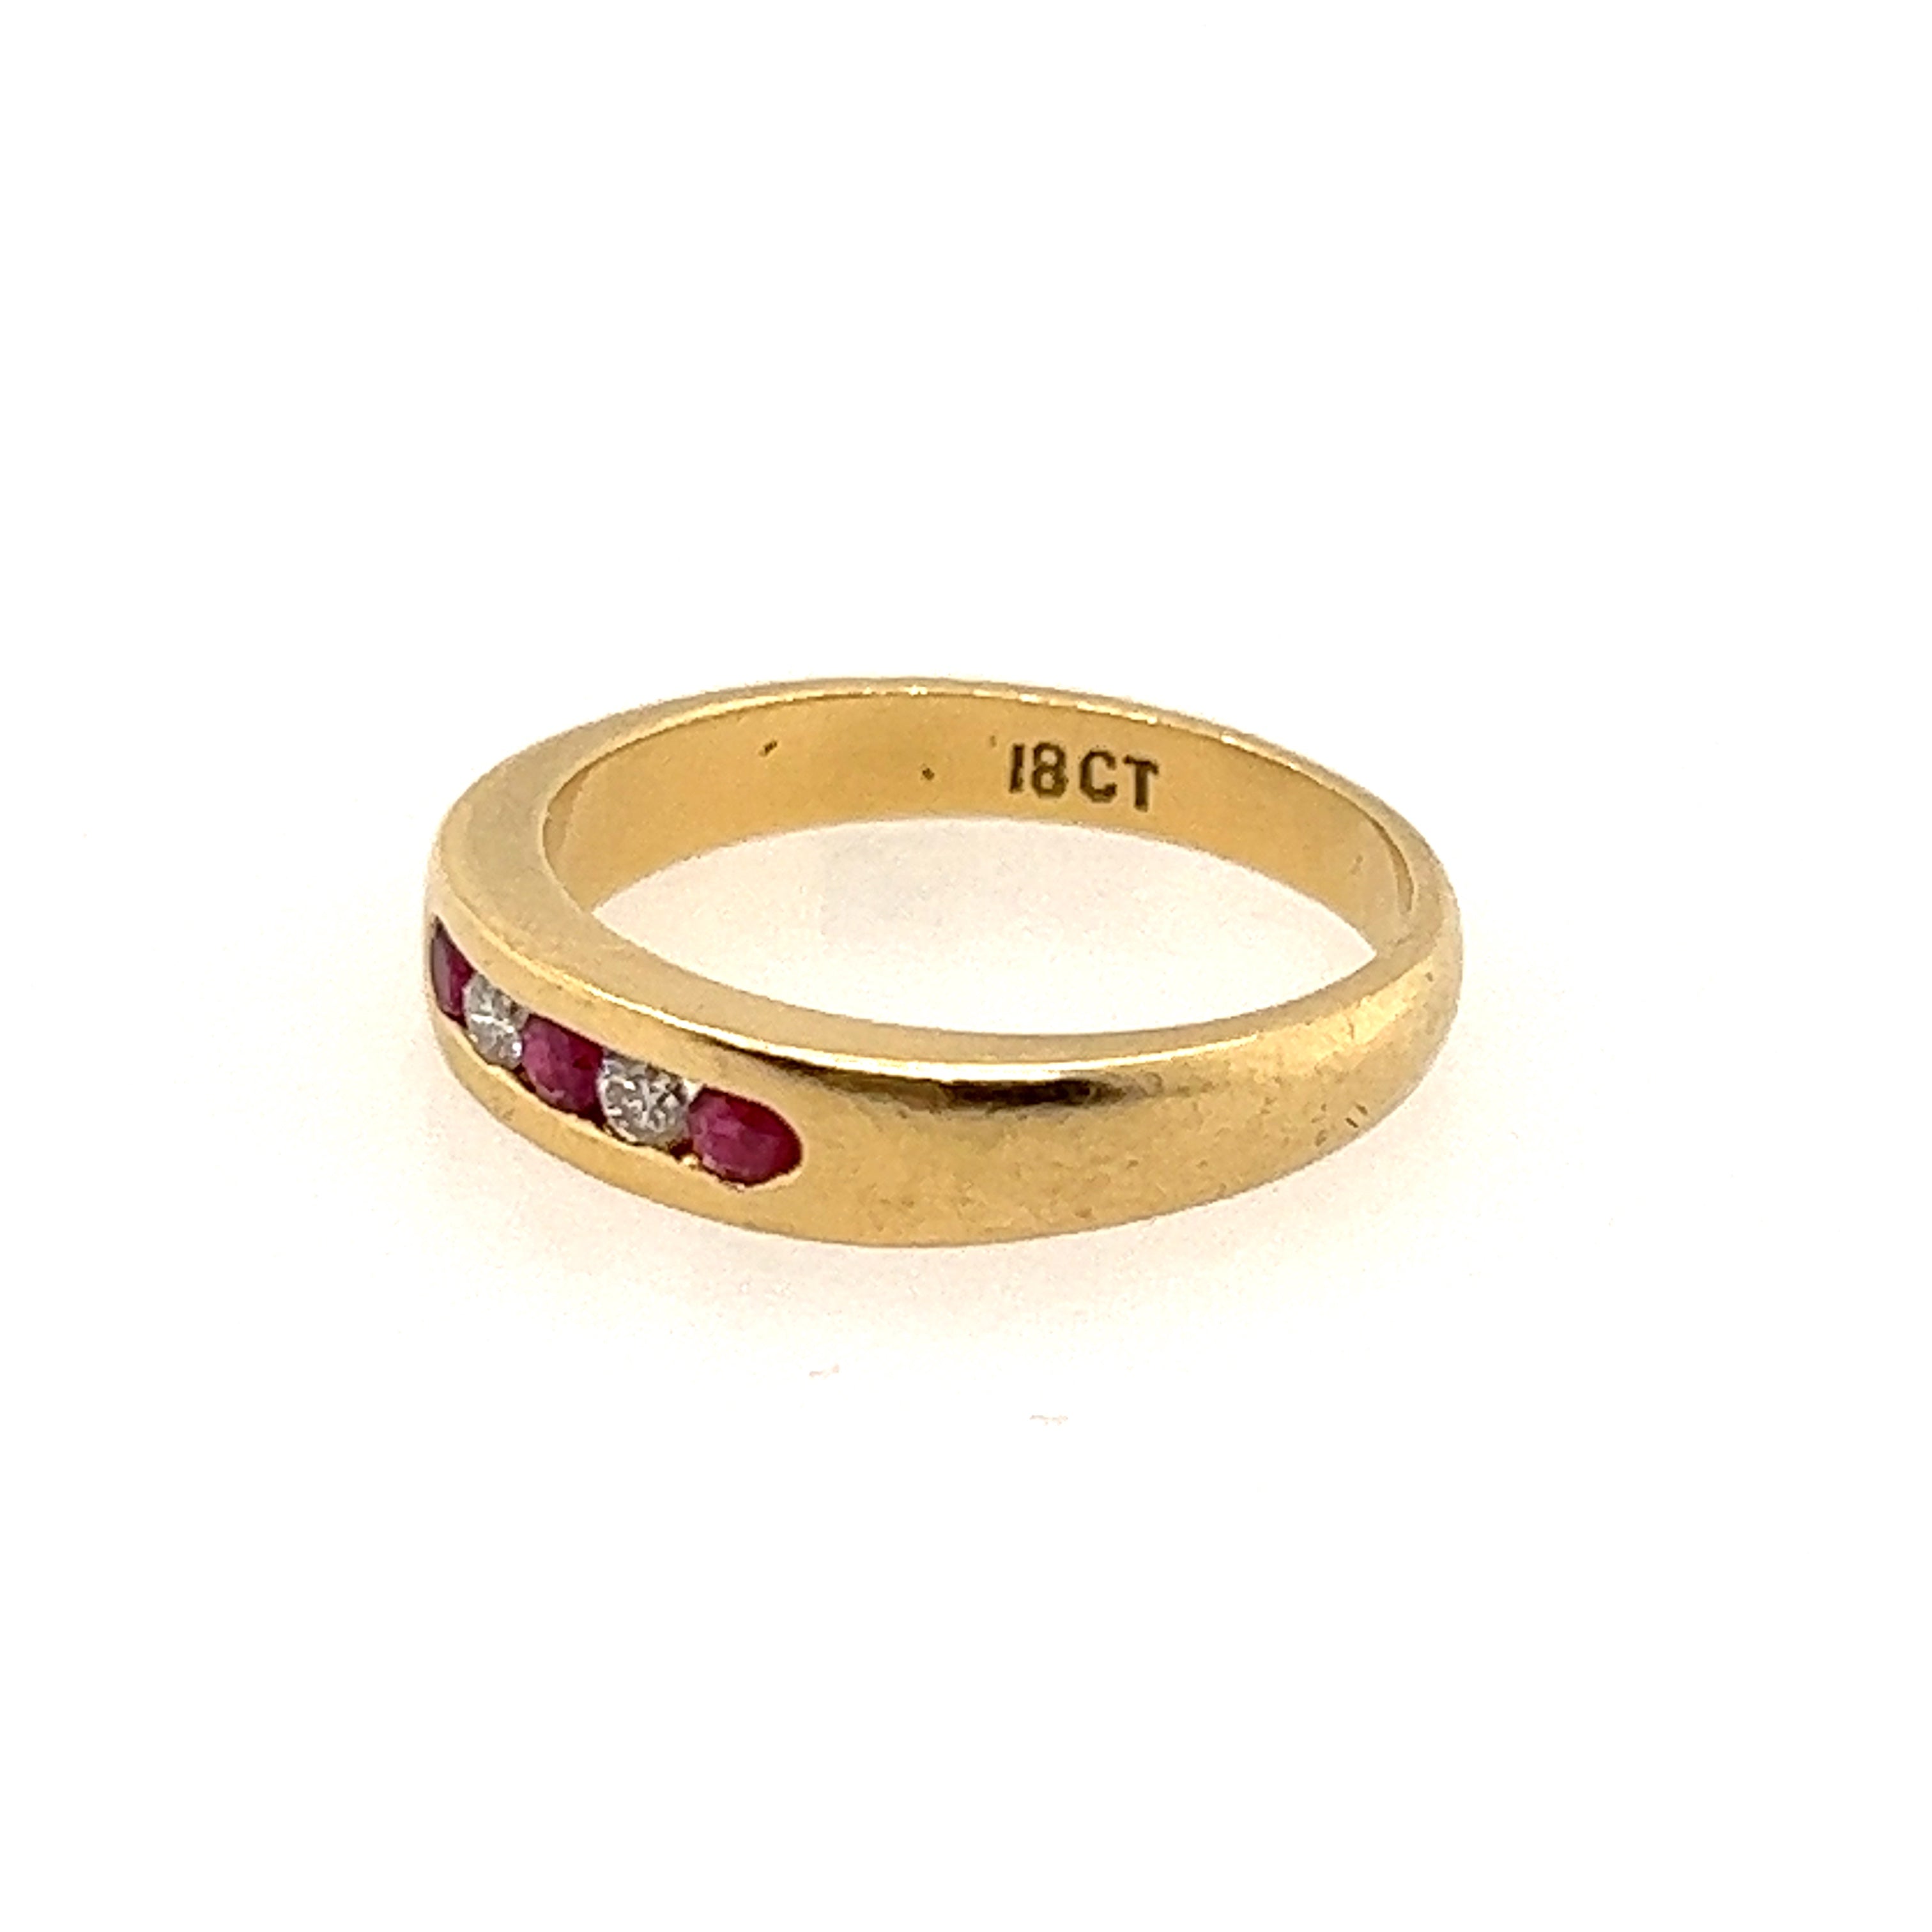 Ruby and Diamond Ring set in 18ct Yellow Gold